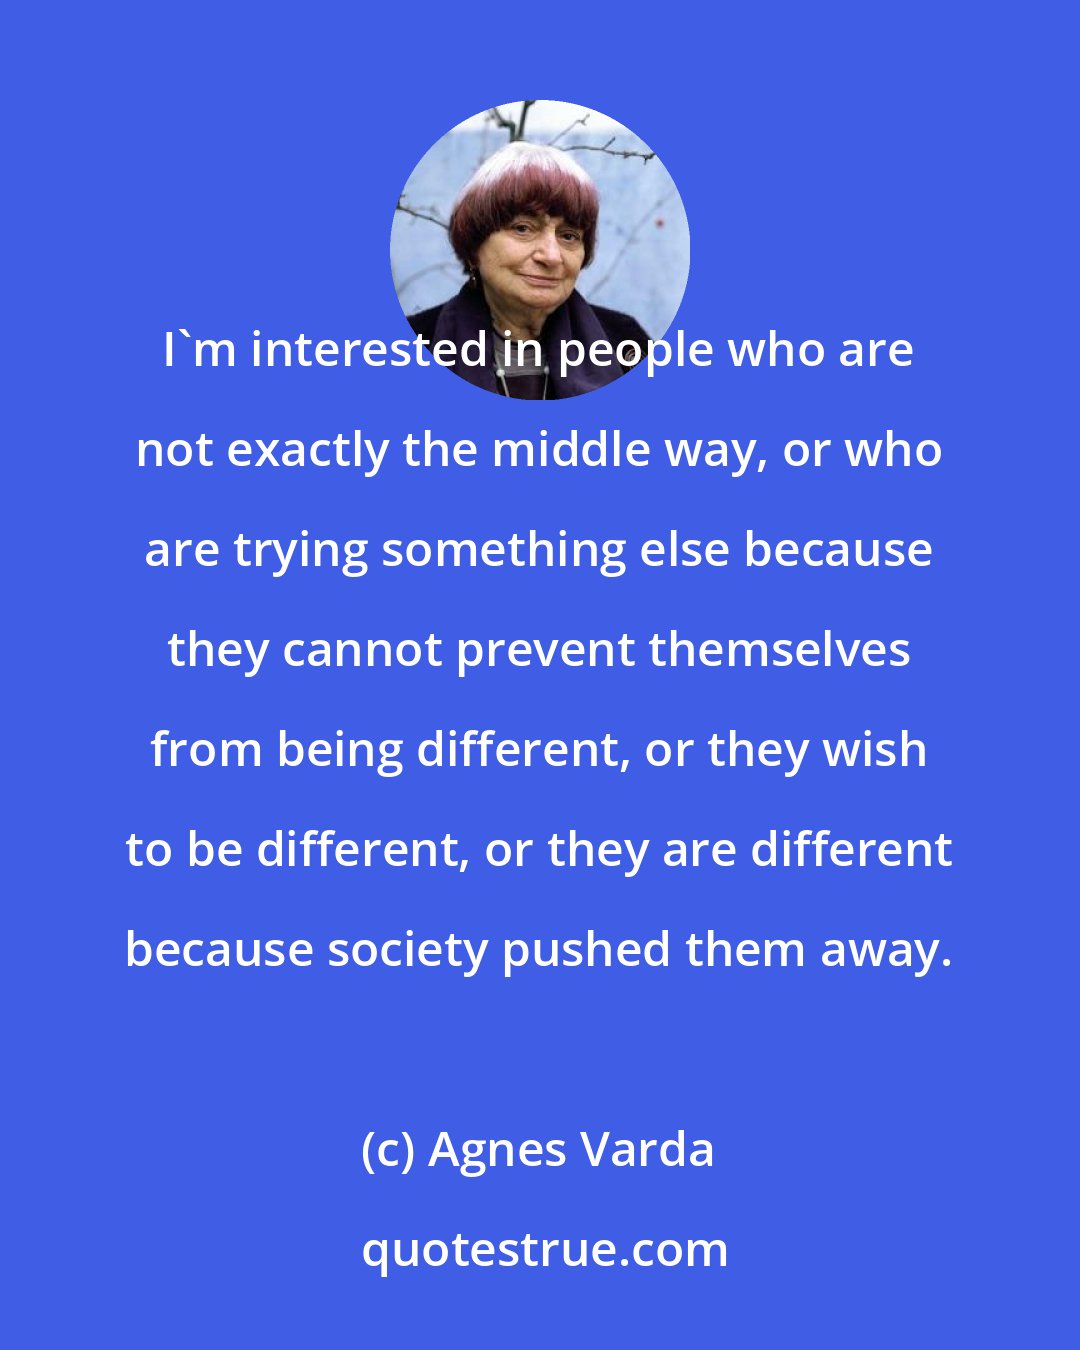 Agnes Varda: I'm interested in people who are not exactly the middle way, or who are trying something else because they cannot prevent themselves from being different, or they wish to be different, or they are different because society pushed them away.